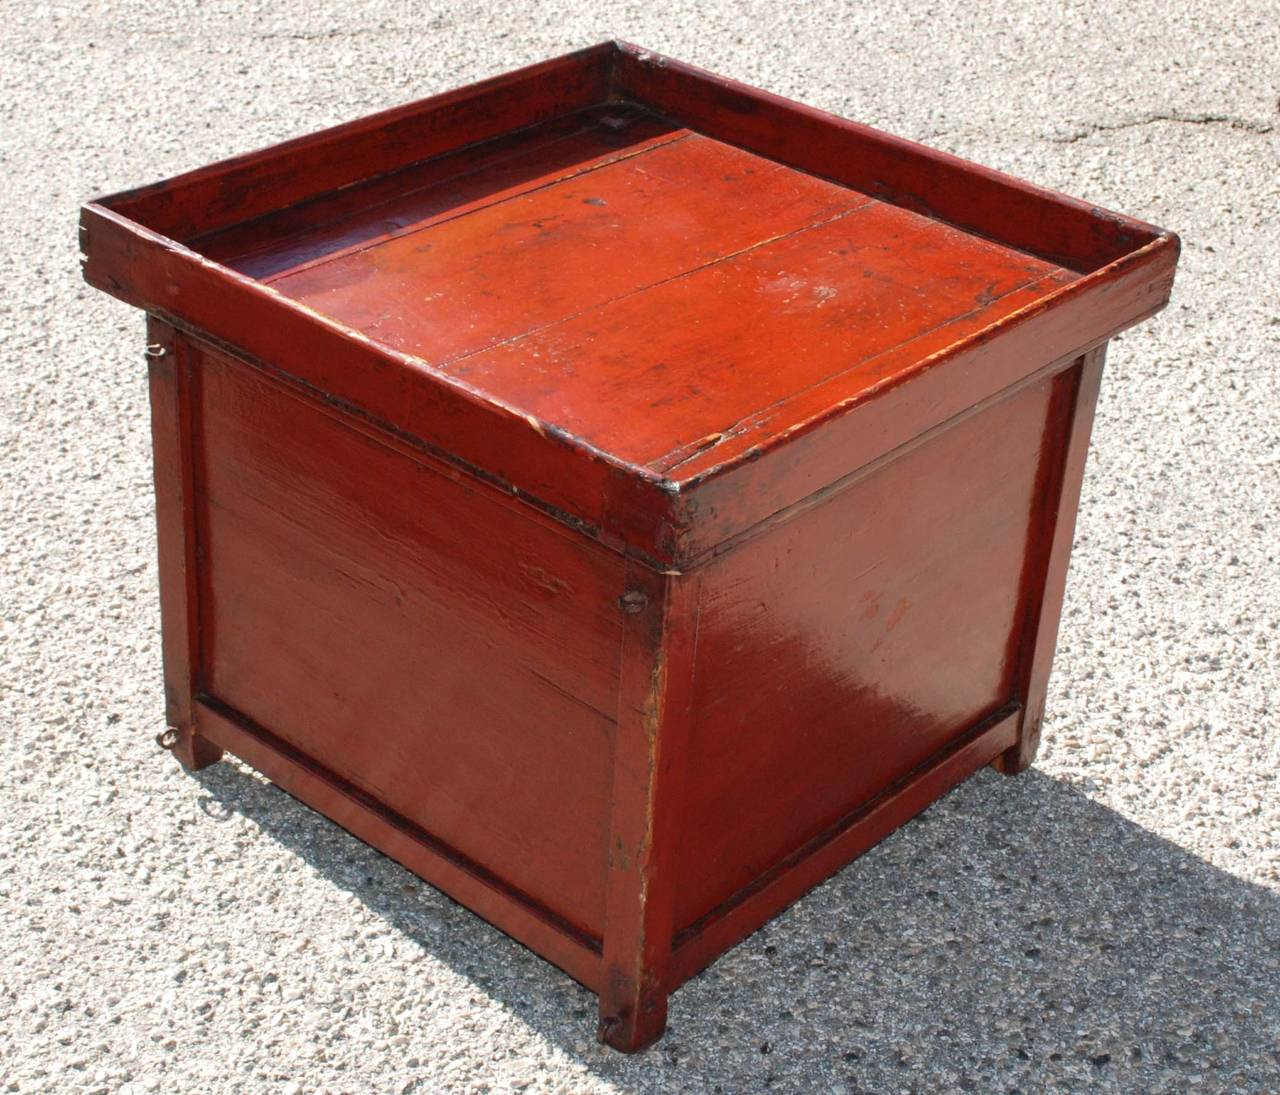 Chinese Peddler’s box with a red cinnabar finish and a removable tray top above two doors. Believed to have been used by a noodle vendor.